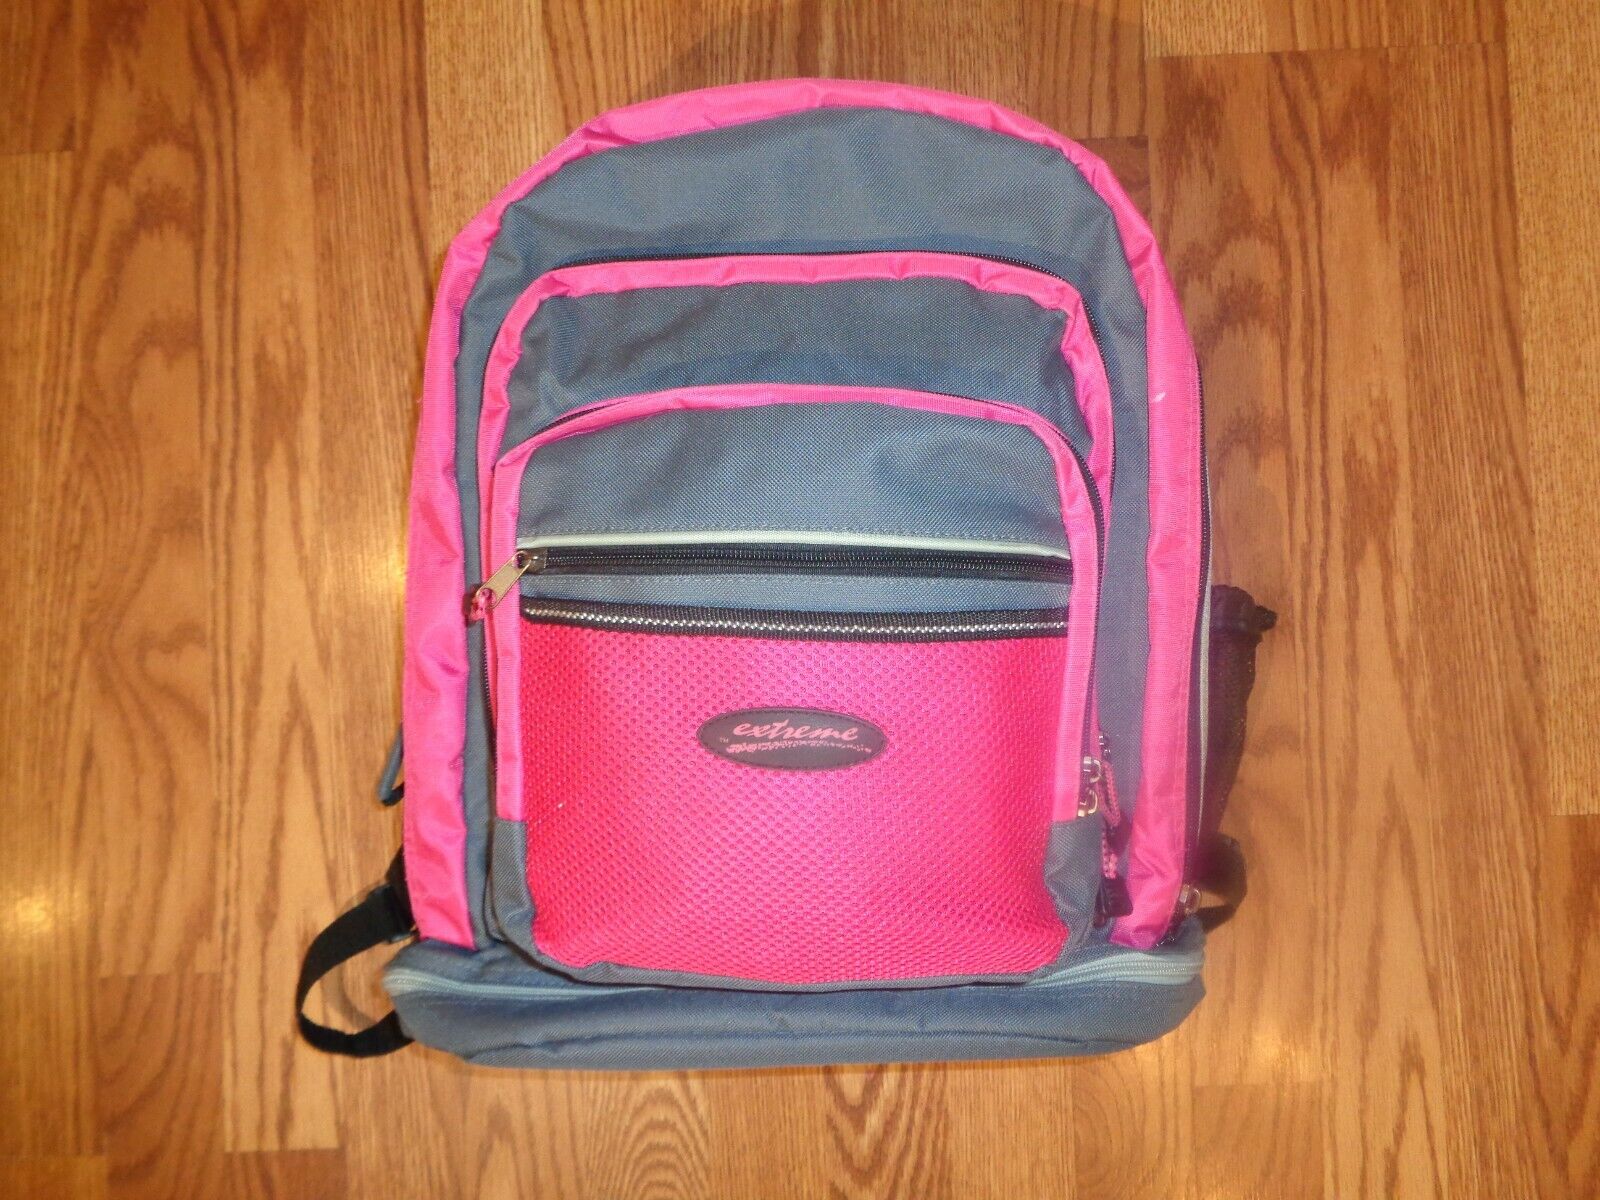 EXTREME BACKPACK 4 ZIPPER SECTIONS & BOTTOM ZIP AROUND PINK & GREY EXCELLENT 